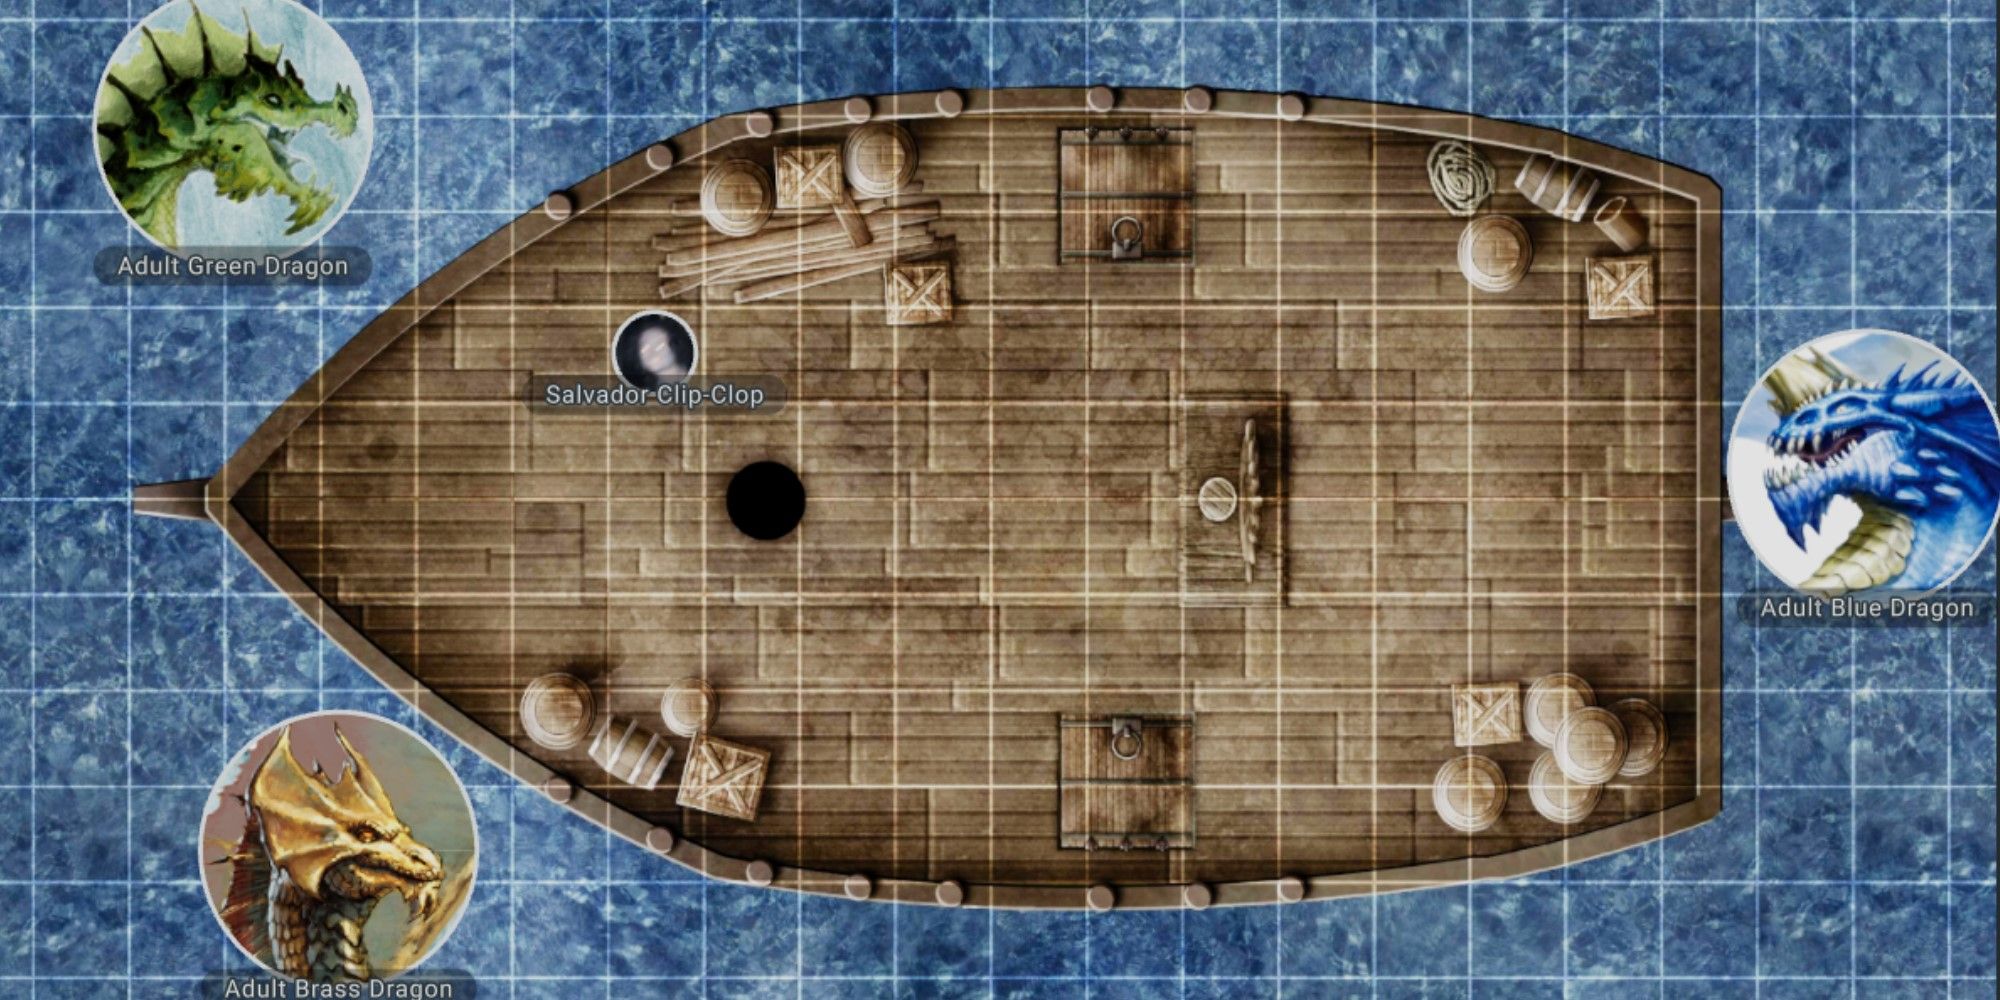 DnD Beyond Maps shows a boat surrounded by dragons.